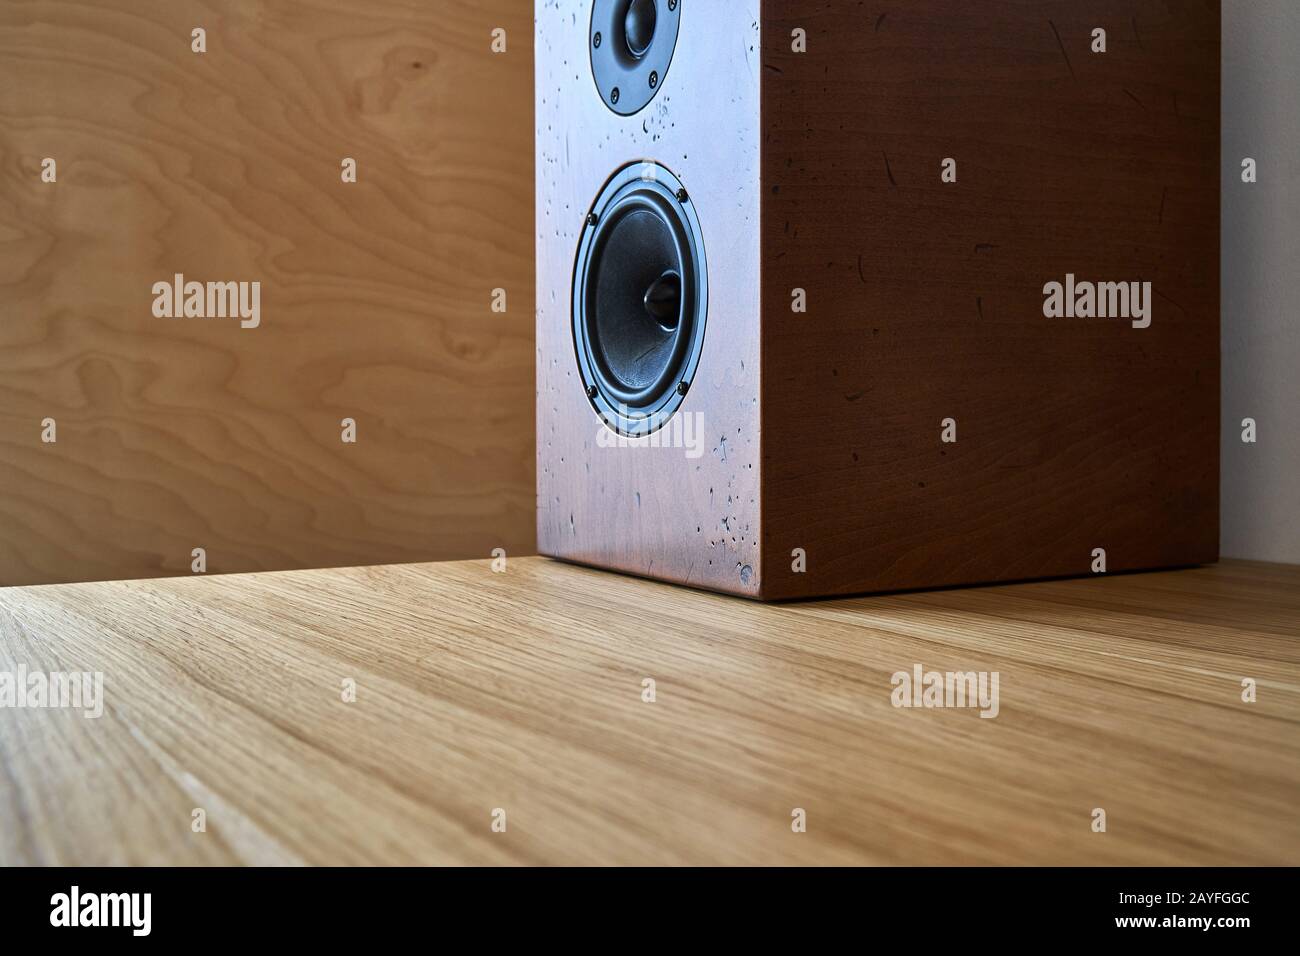 Diy Bookshelf Speaker Standing On A Table Against The Plywood Wall Stock Photo Alamy